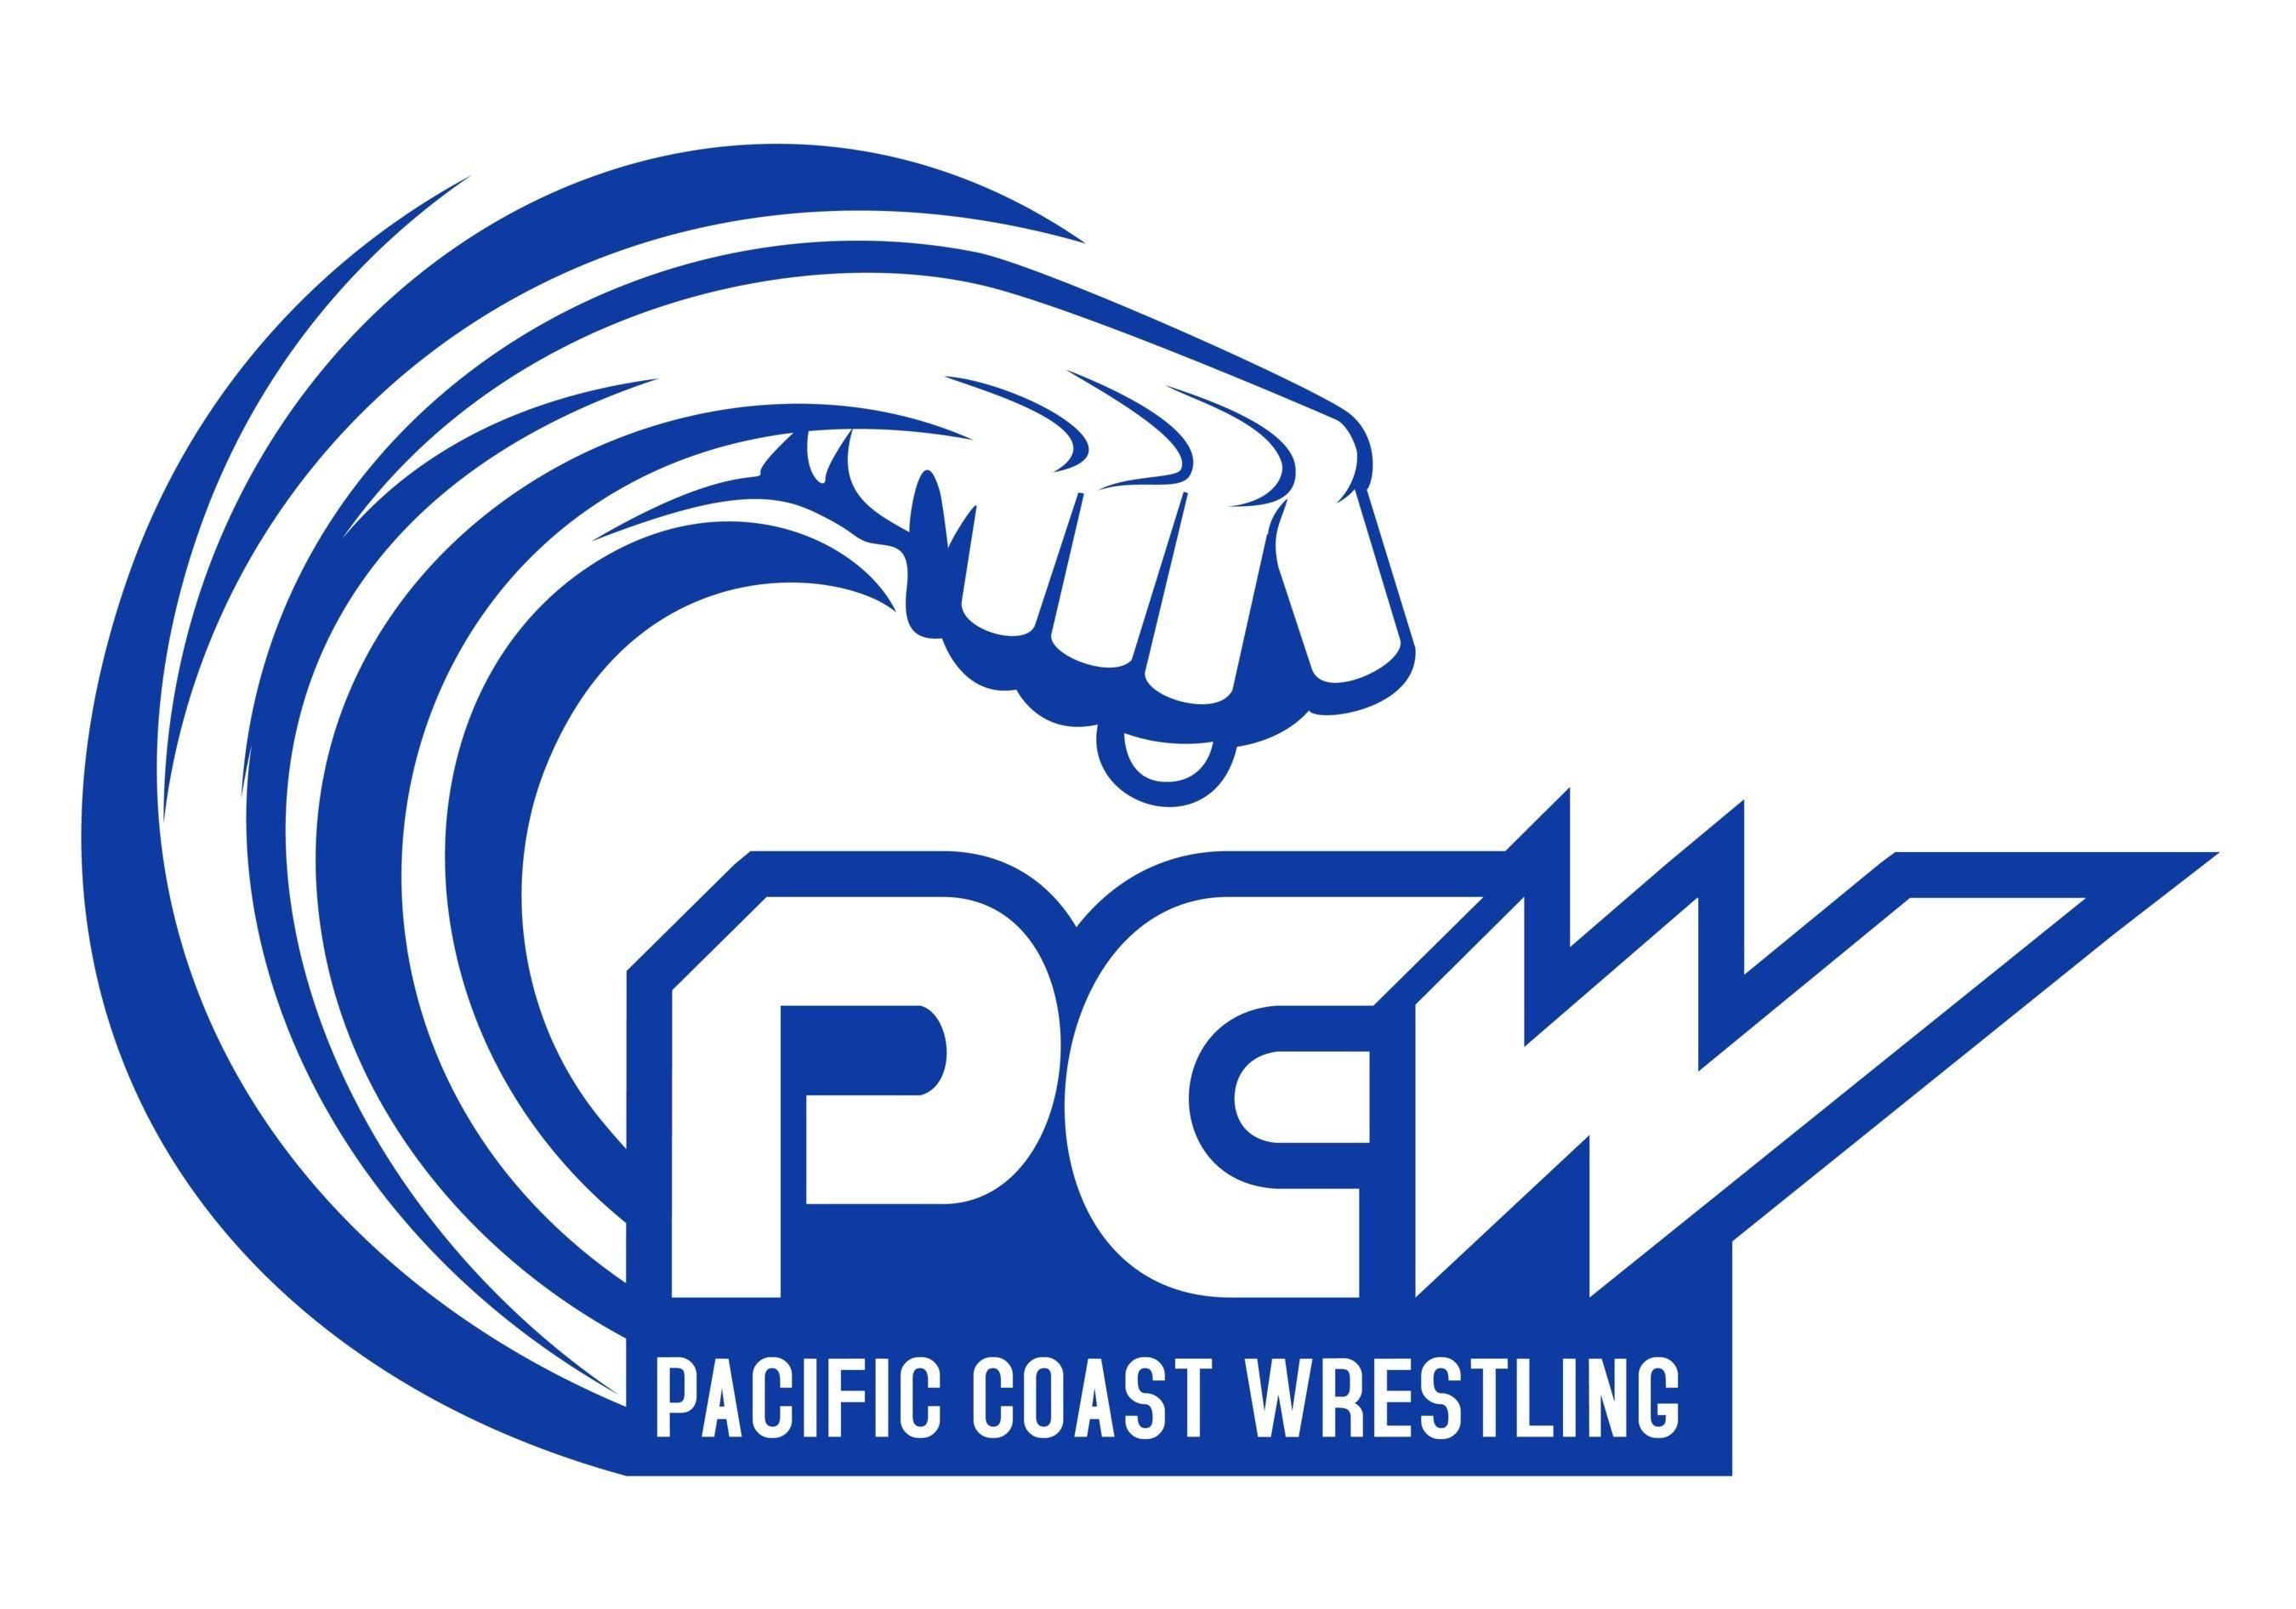 Pacific Coast Wrestling (PCW) is the brainchild of former Pro-Pain Pro Wrestling (3PW) promoter, Mike Hawes, and marketing veteran, Mike Scharnagl. PCW brings a blend of Japanese strong style and old school pro wrestling (1970s and 80s NWA) to the South Bay beach cities of Los Angeles. For more information regarding Pacific Coast Wrestling, please visit pacificcoastwrestling.com or facebook.com/pacificcoastwrestling